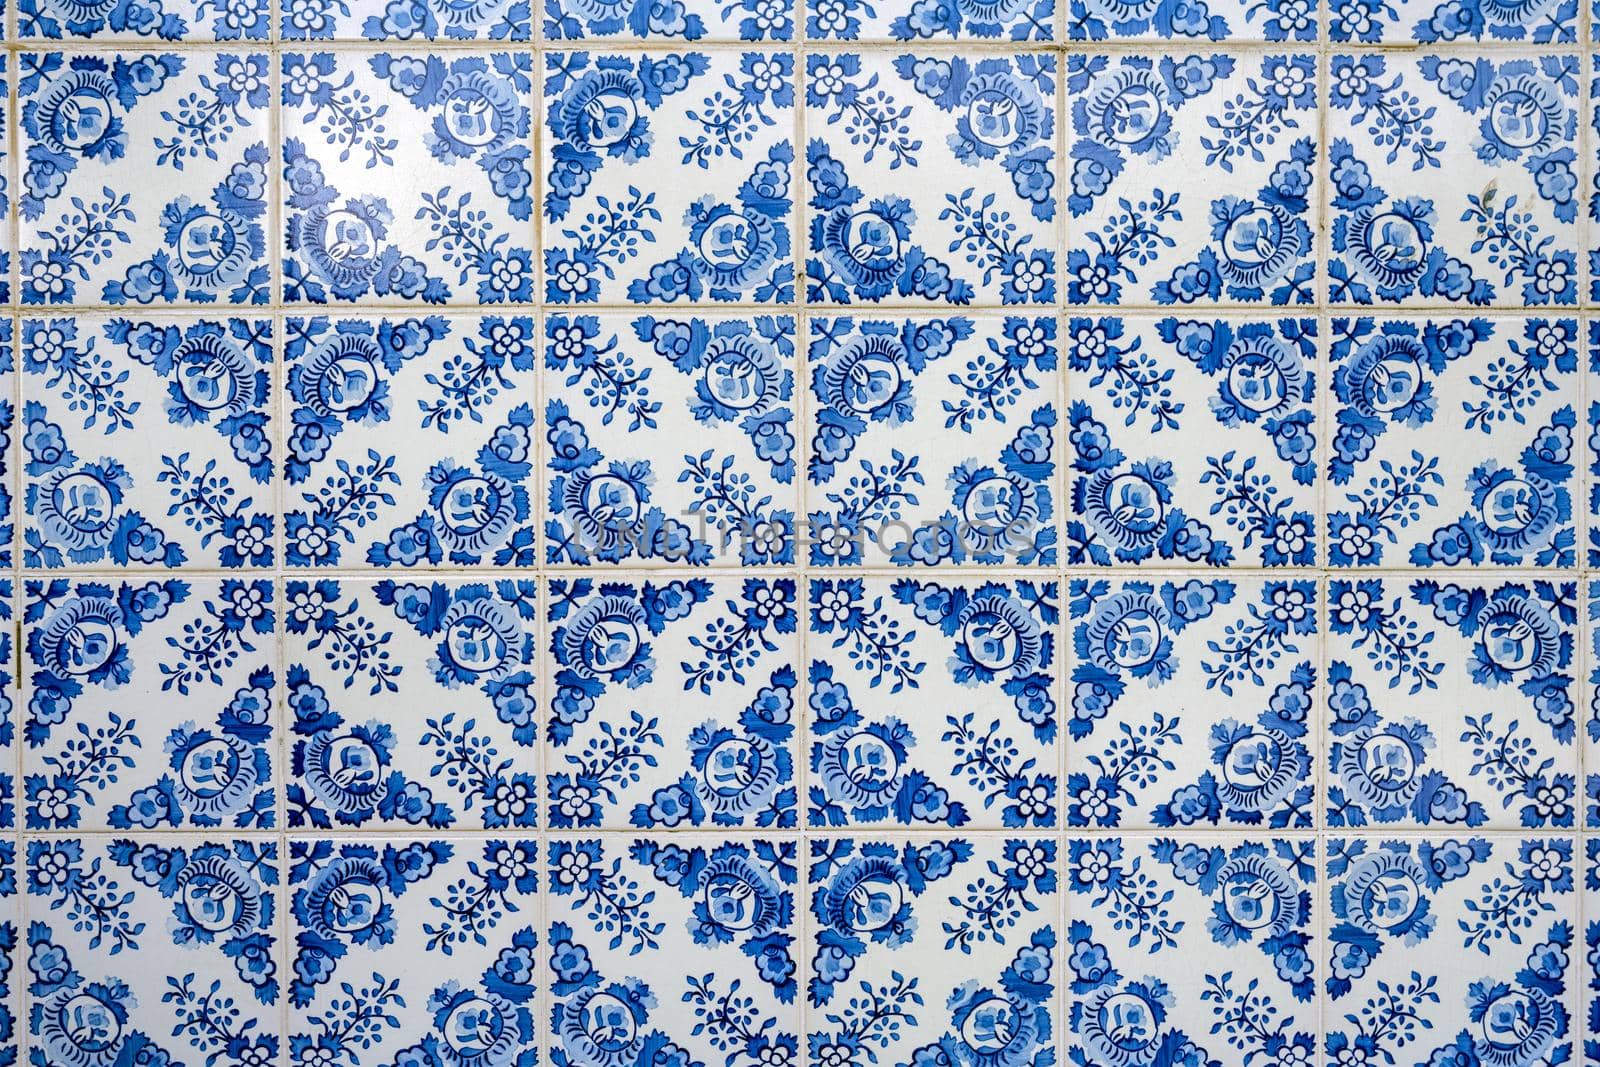 Background from a typical blue portuguese tiled wall